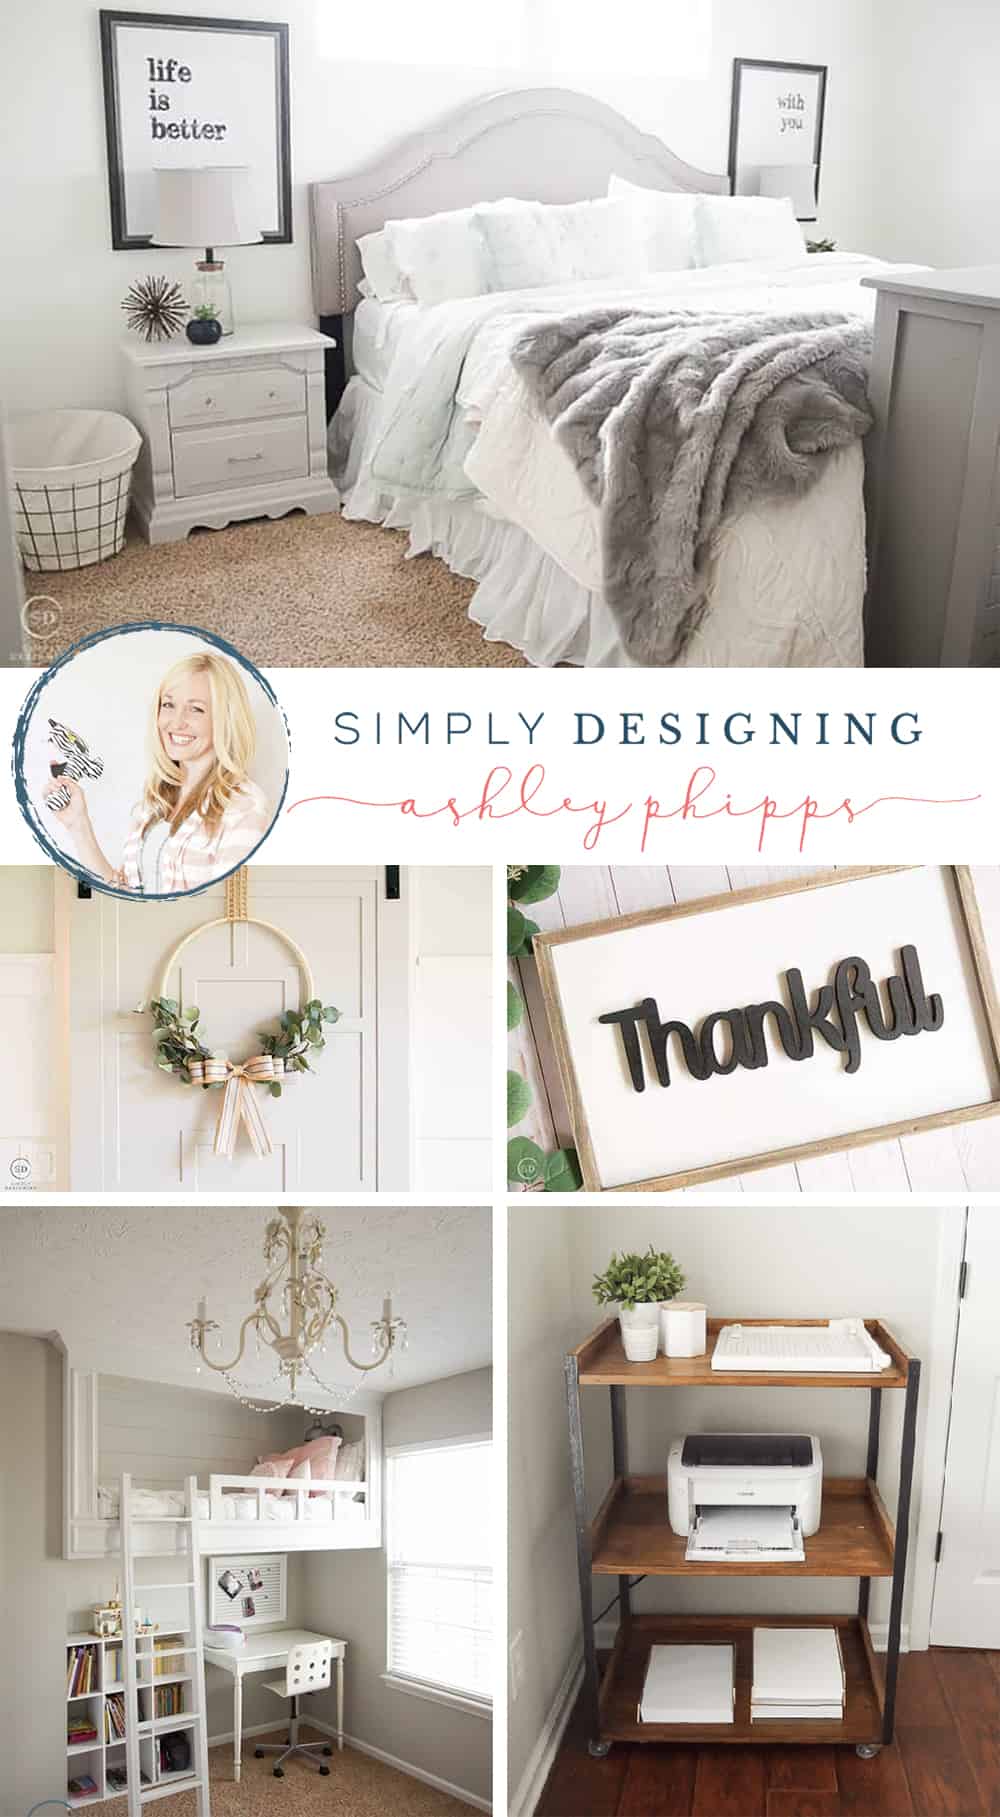 SimplyDesigning AshleyPhipps 45 Light Bright and Beautiful Home Inspiration Ideas 16 Minimalist Living